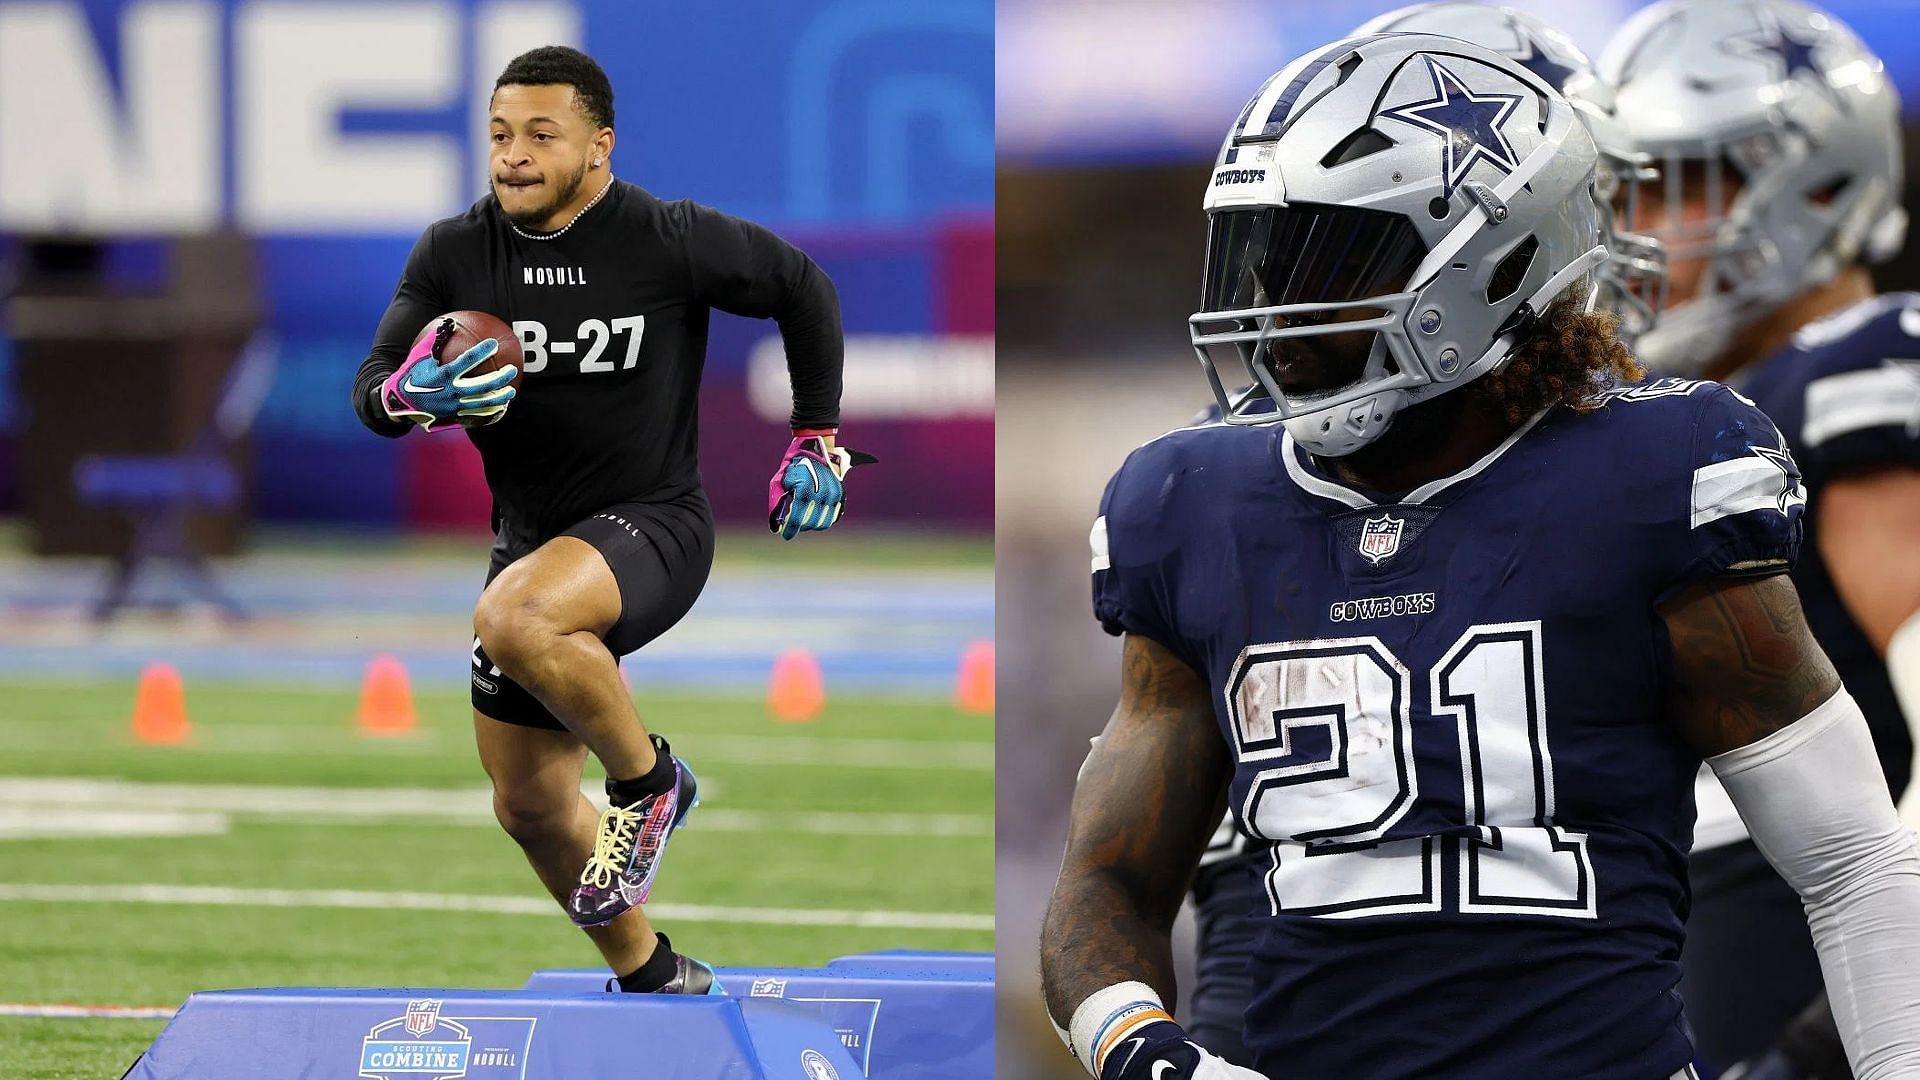 Deuce and Zeke, who has the faster 40-yard time?